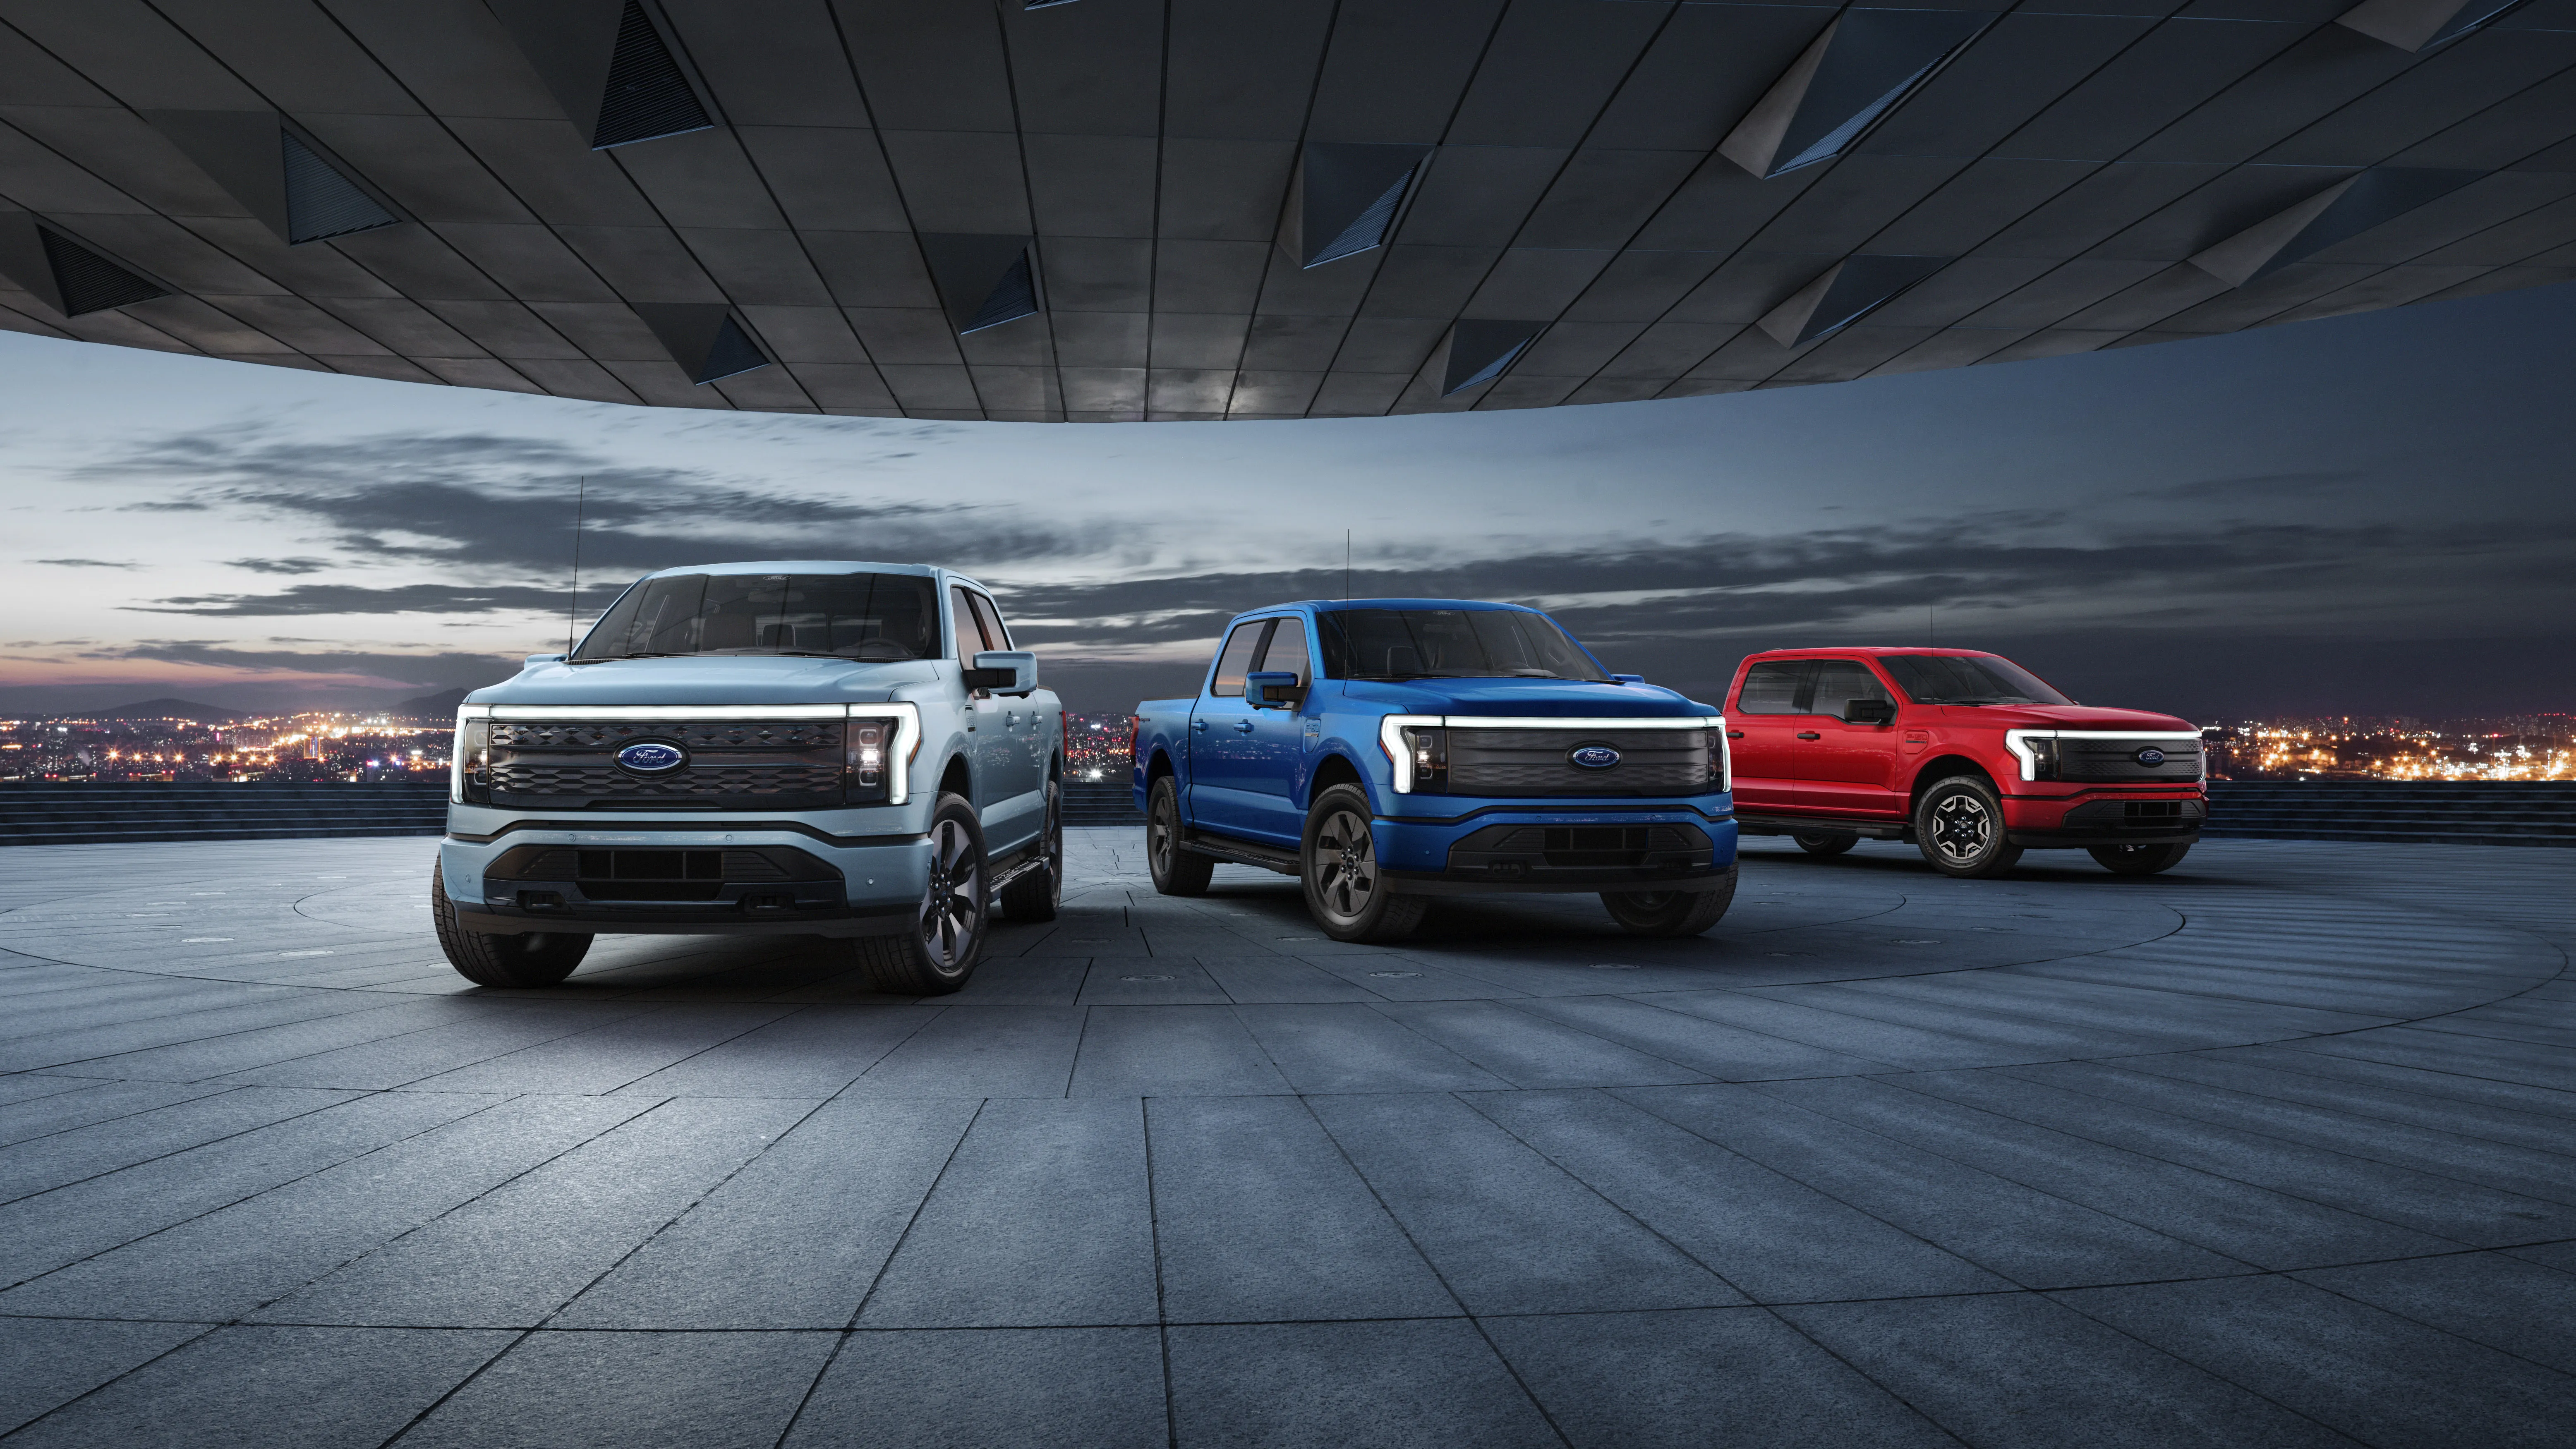 2022 Ford F-150 Lightning Buyer’s Guide